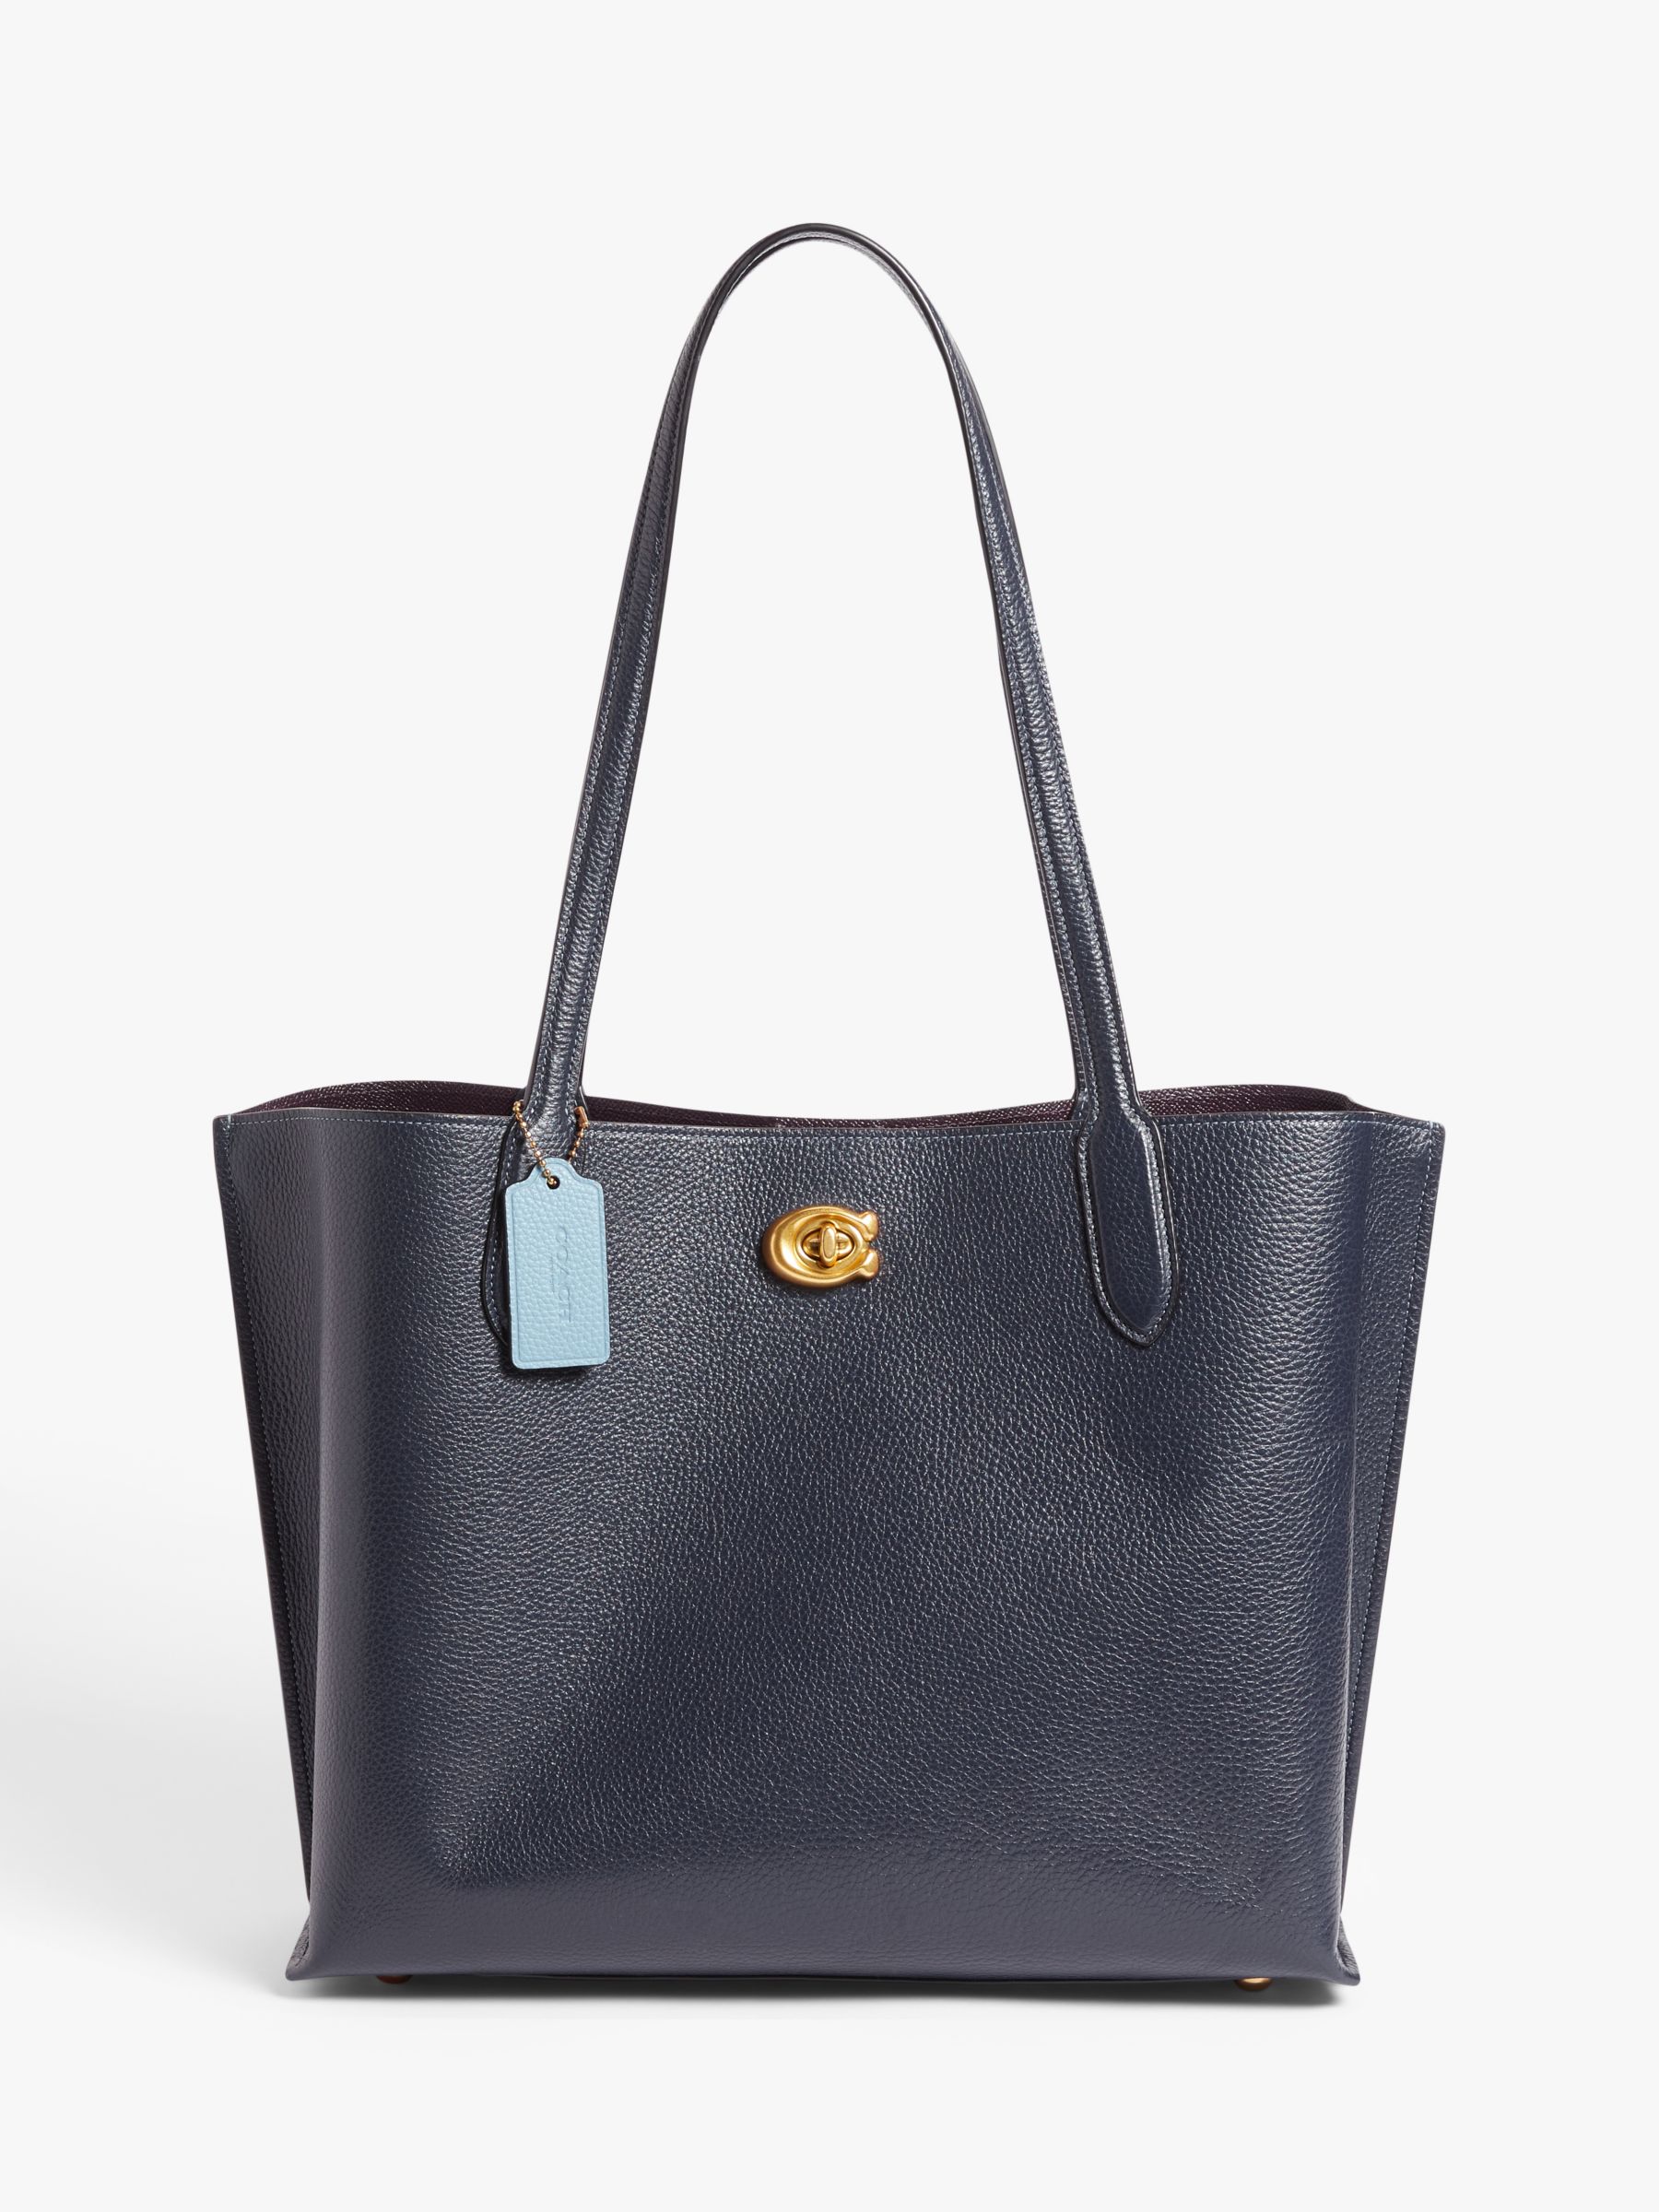 Coach Willow Leather Tote Bag, Navy at John Lewis & Partners